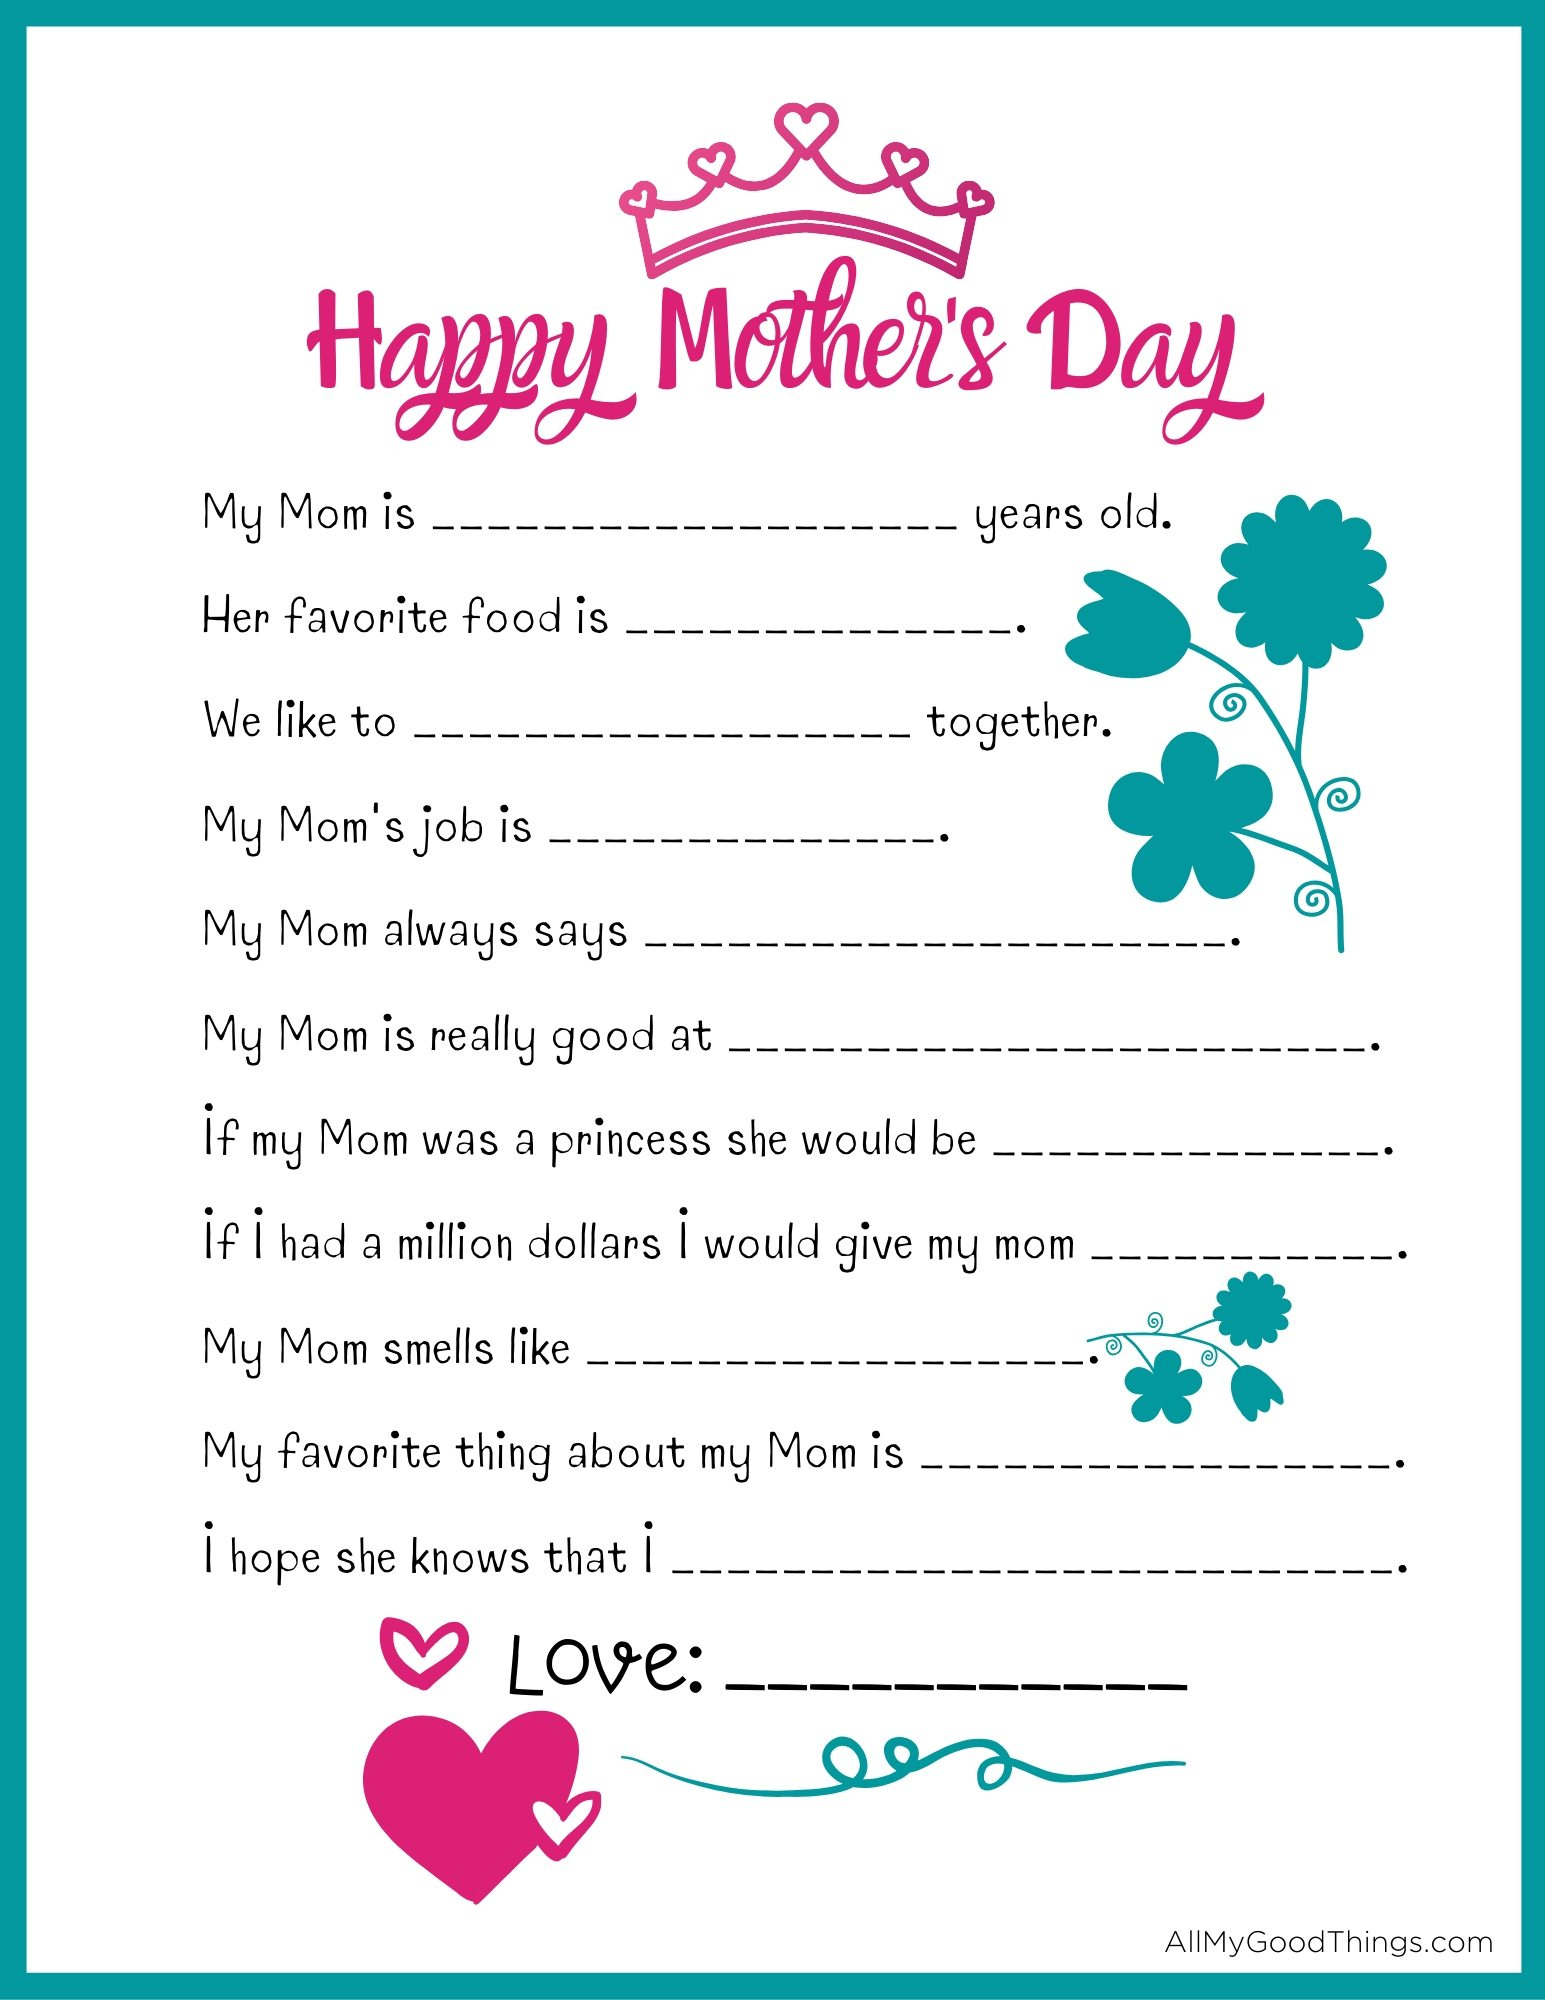 Free Mother&amp;#039;S Day Questionnaire Printable - All My Good Things throughout Free Printable Mother&amp;amp;#039;s Day Questionnaire